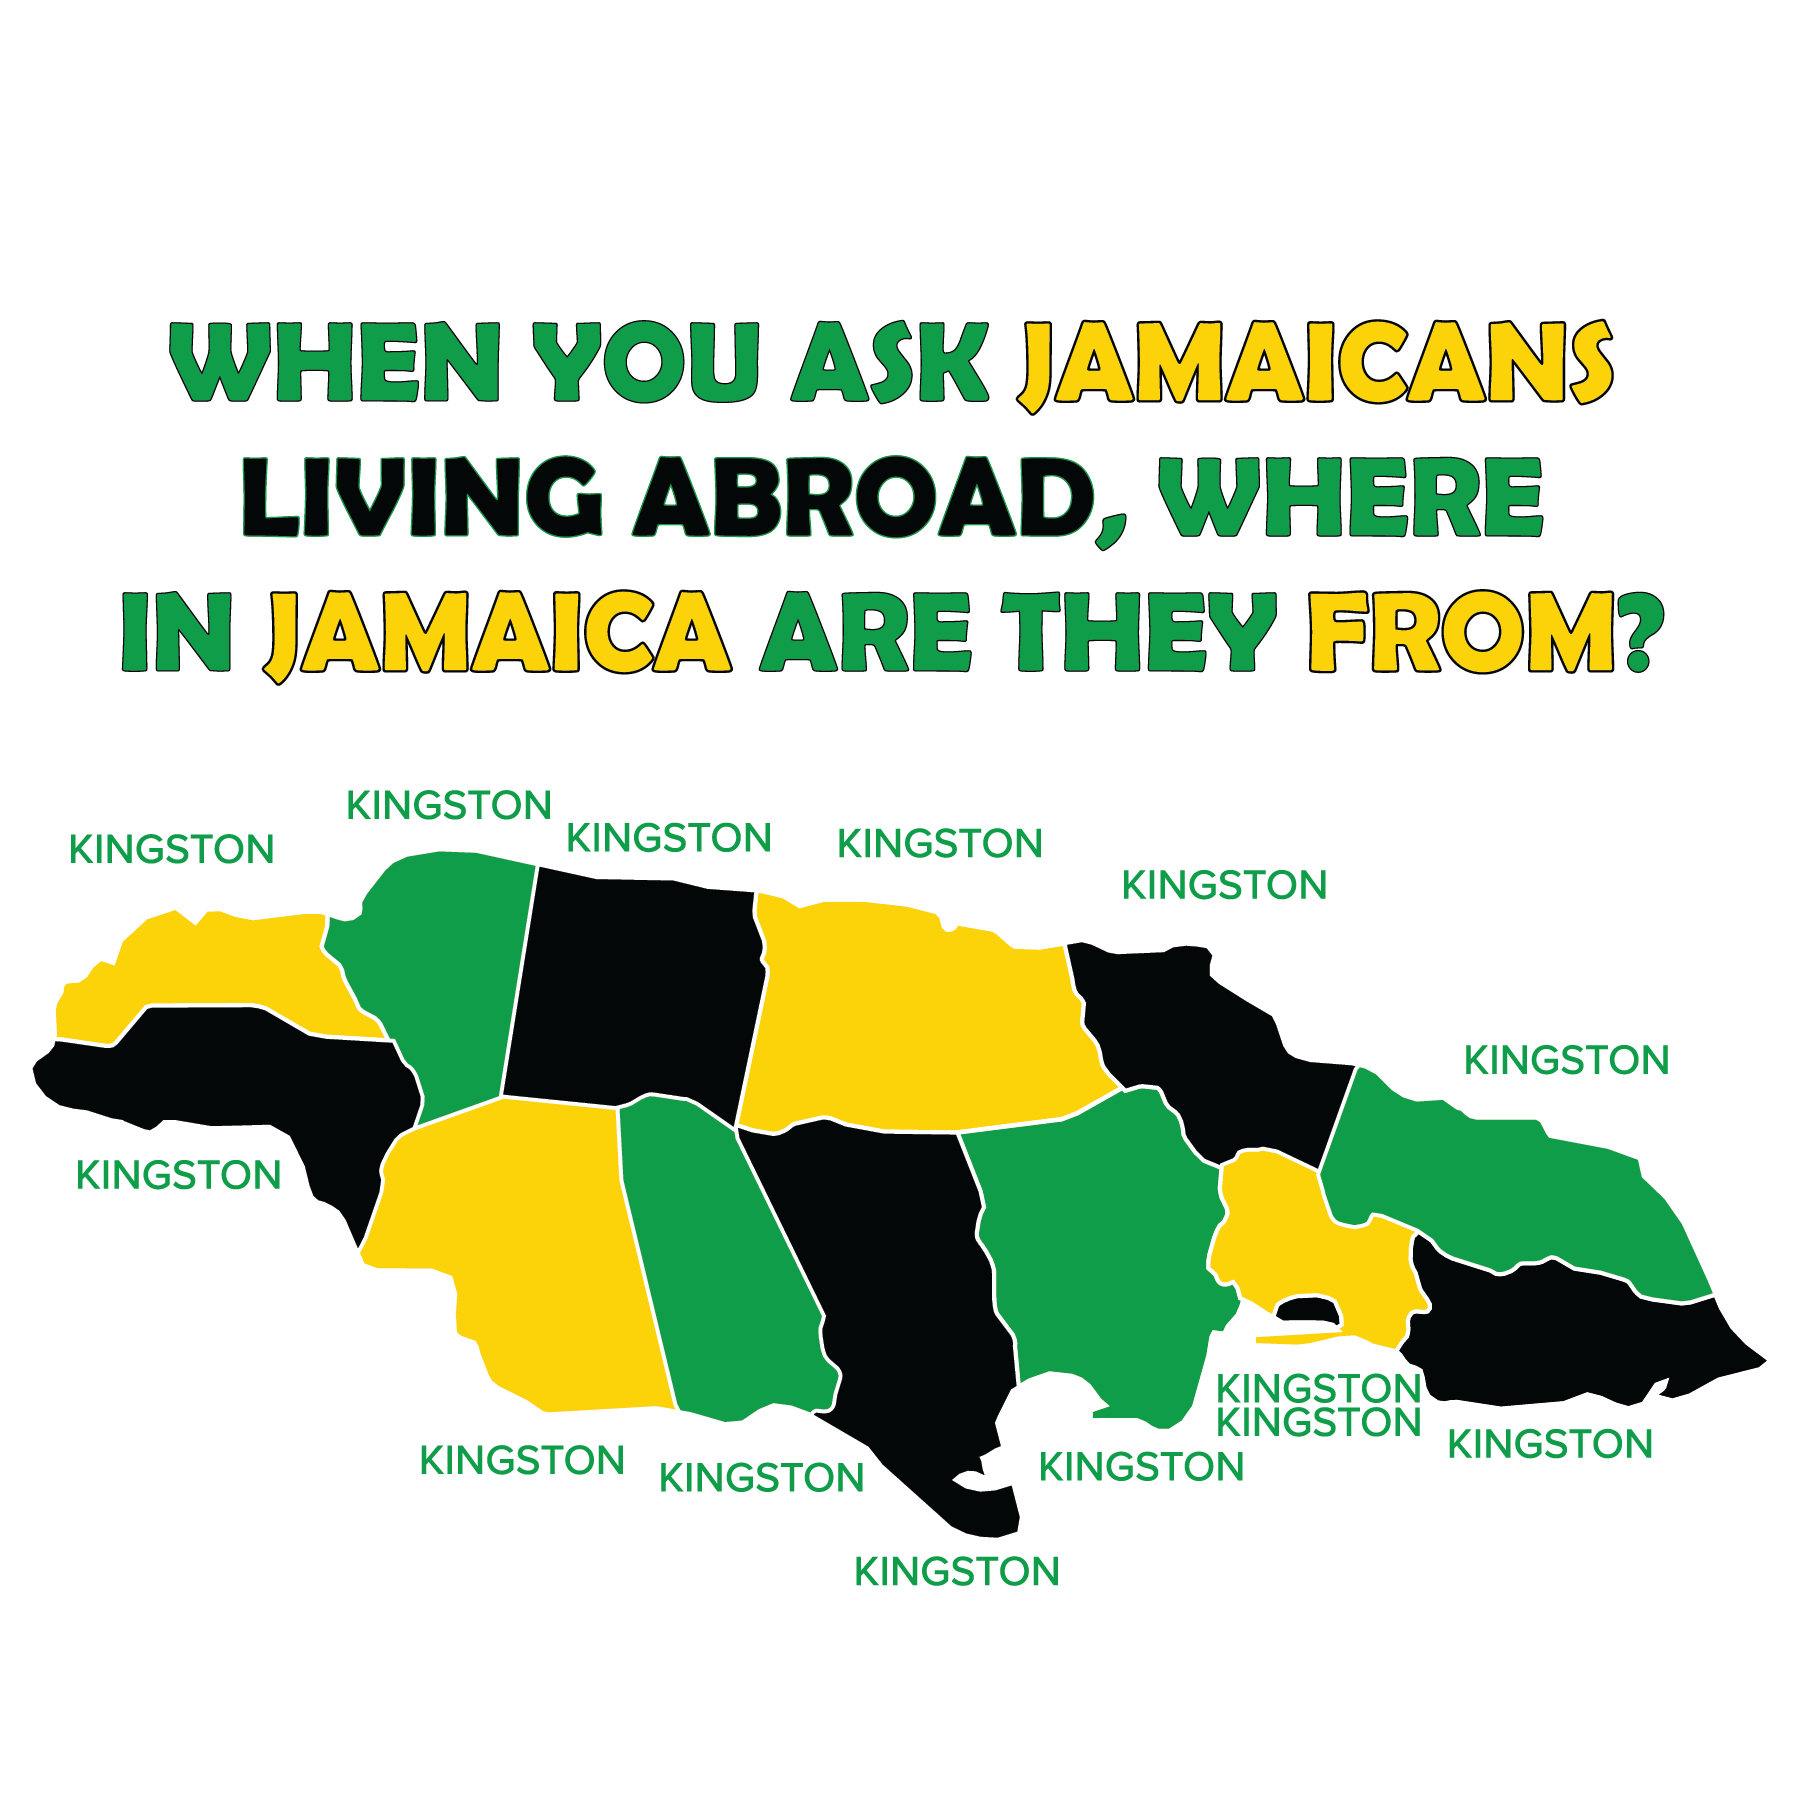 Where Jamaicans abroad say they’re from